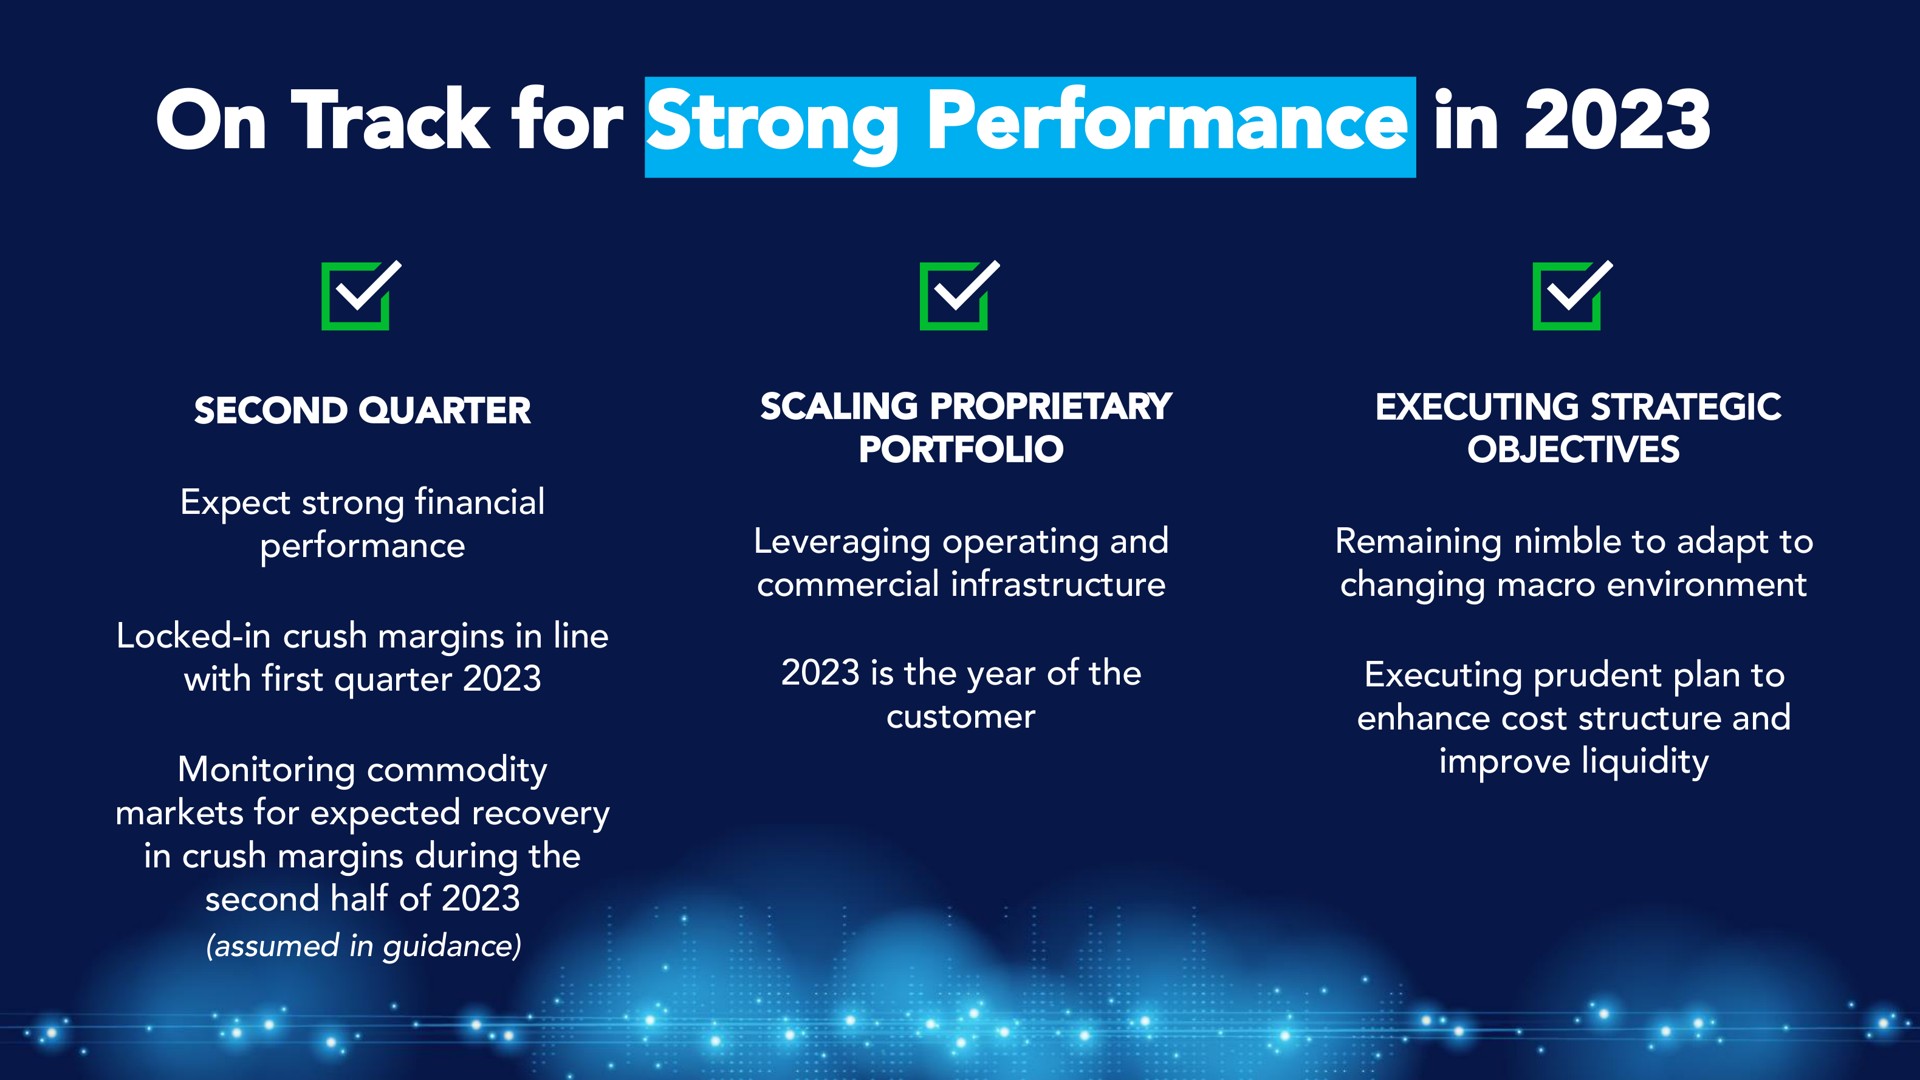 on track for strong performance in second quarter expect strong financial performance locked in crush margins in line with first quarter monitoring commodity markets for expected recovery in crush margins during the second half of scaling proprietary portfolio executing strategic objectives leveraging operating and commercial infrastructure remaining nimble to adapt to changing macro environment is the year of the customer executing prudent plan to enhance cost structure and improve liquidity | Benson Hill